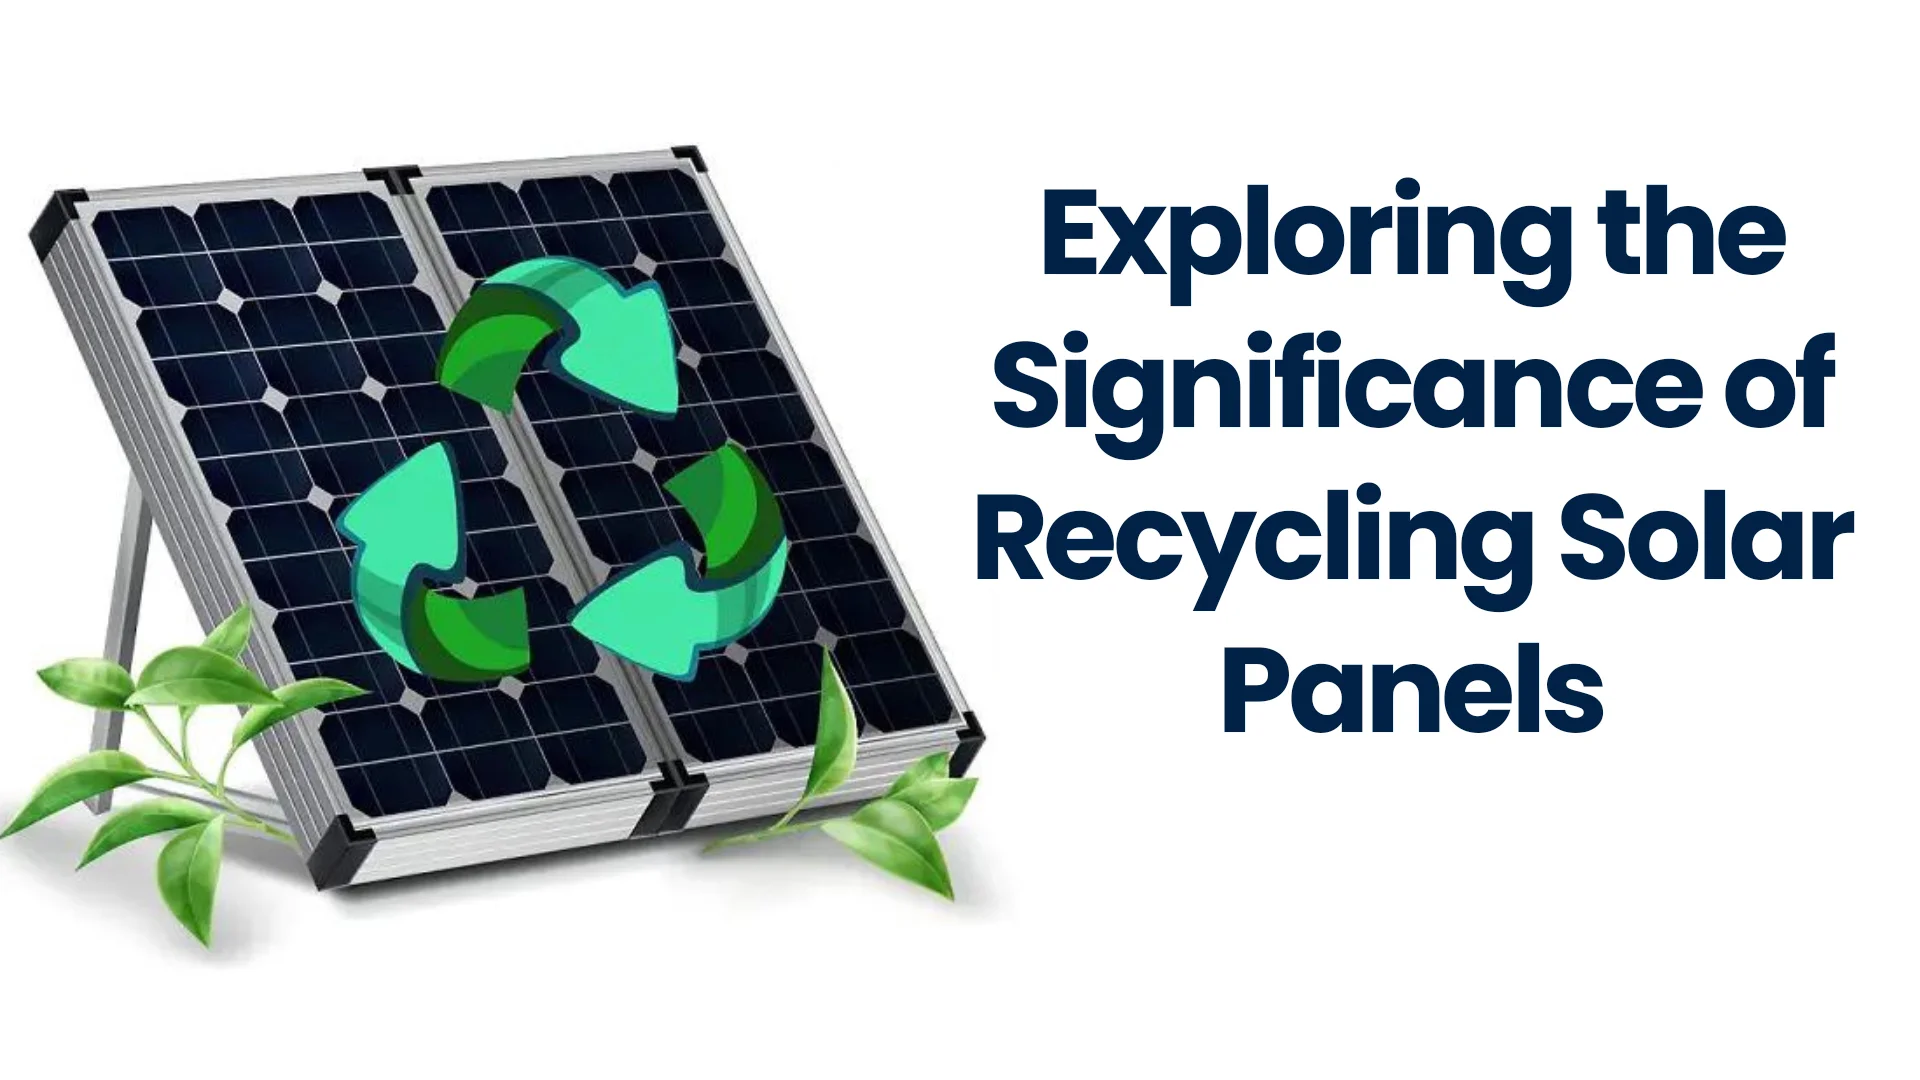 Exploring the Significance of Recycling Solar Panels